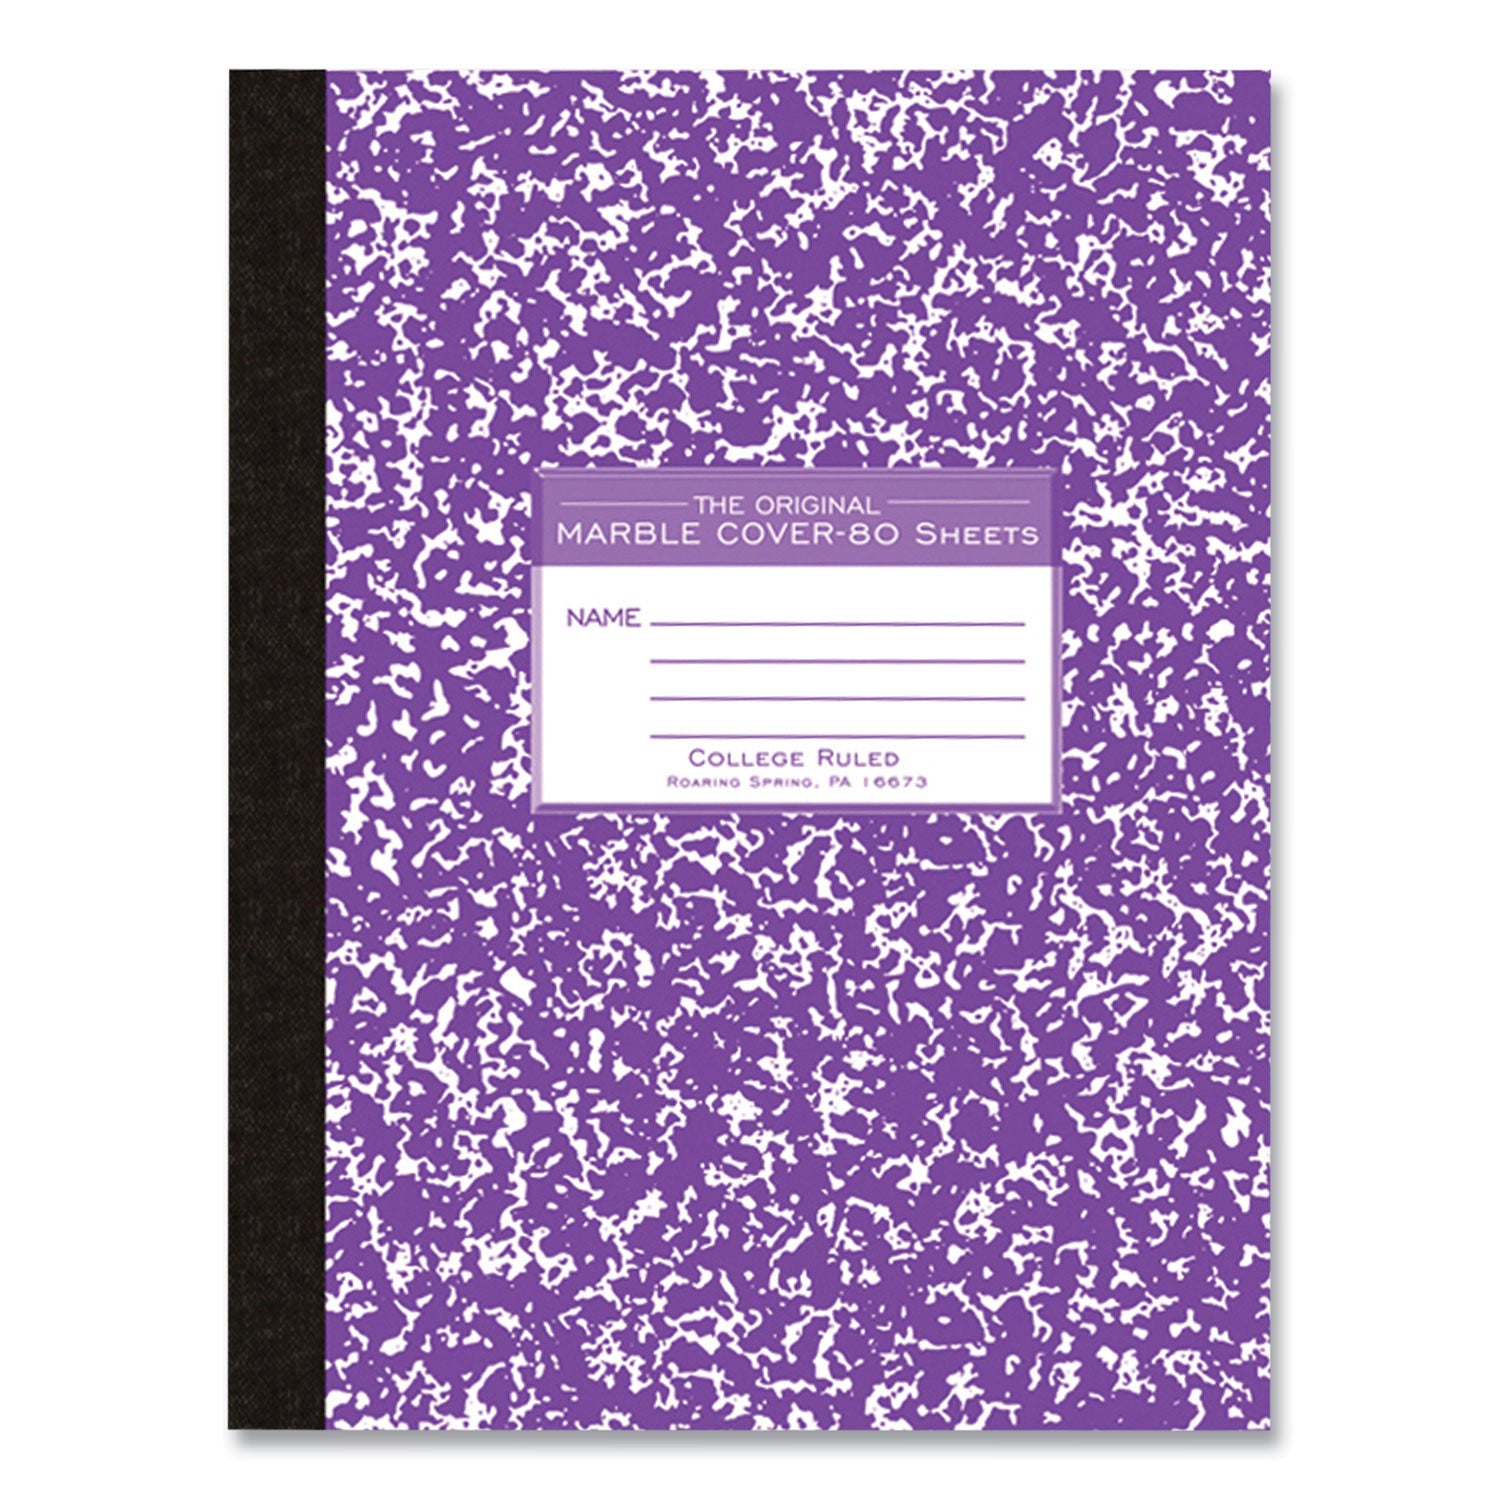 flexible-cover-marble-composition-book-med-college-rule-asst-cover-80-1025-x-788-sheet-48-ct-ships-in-4-6-bus-days_roa77480cs - 7